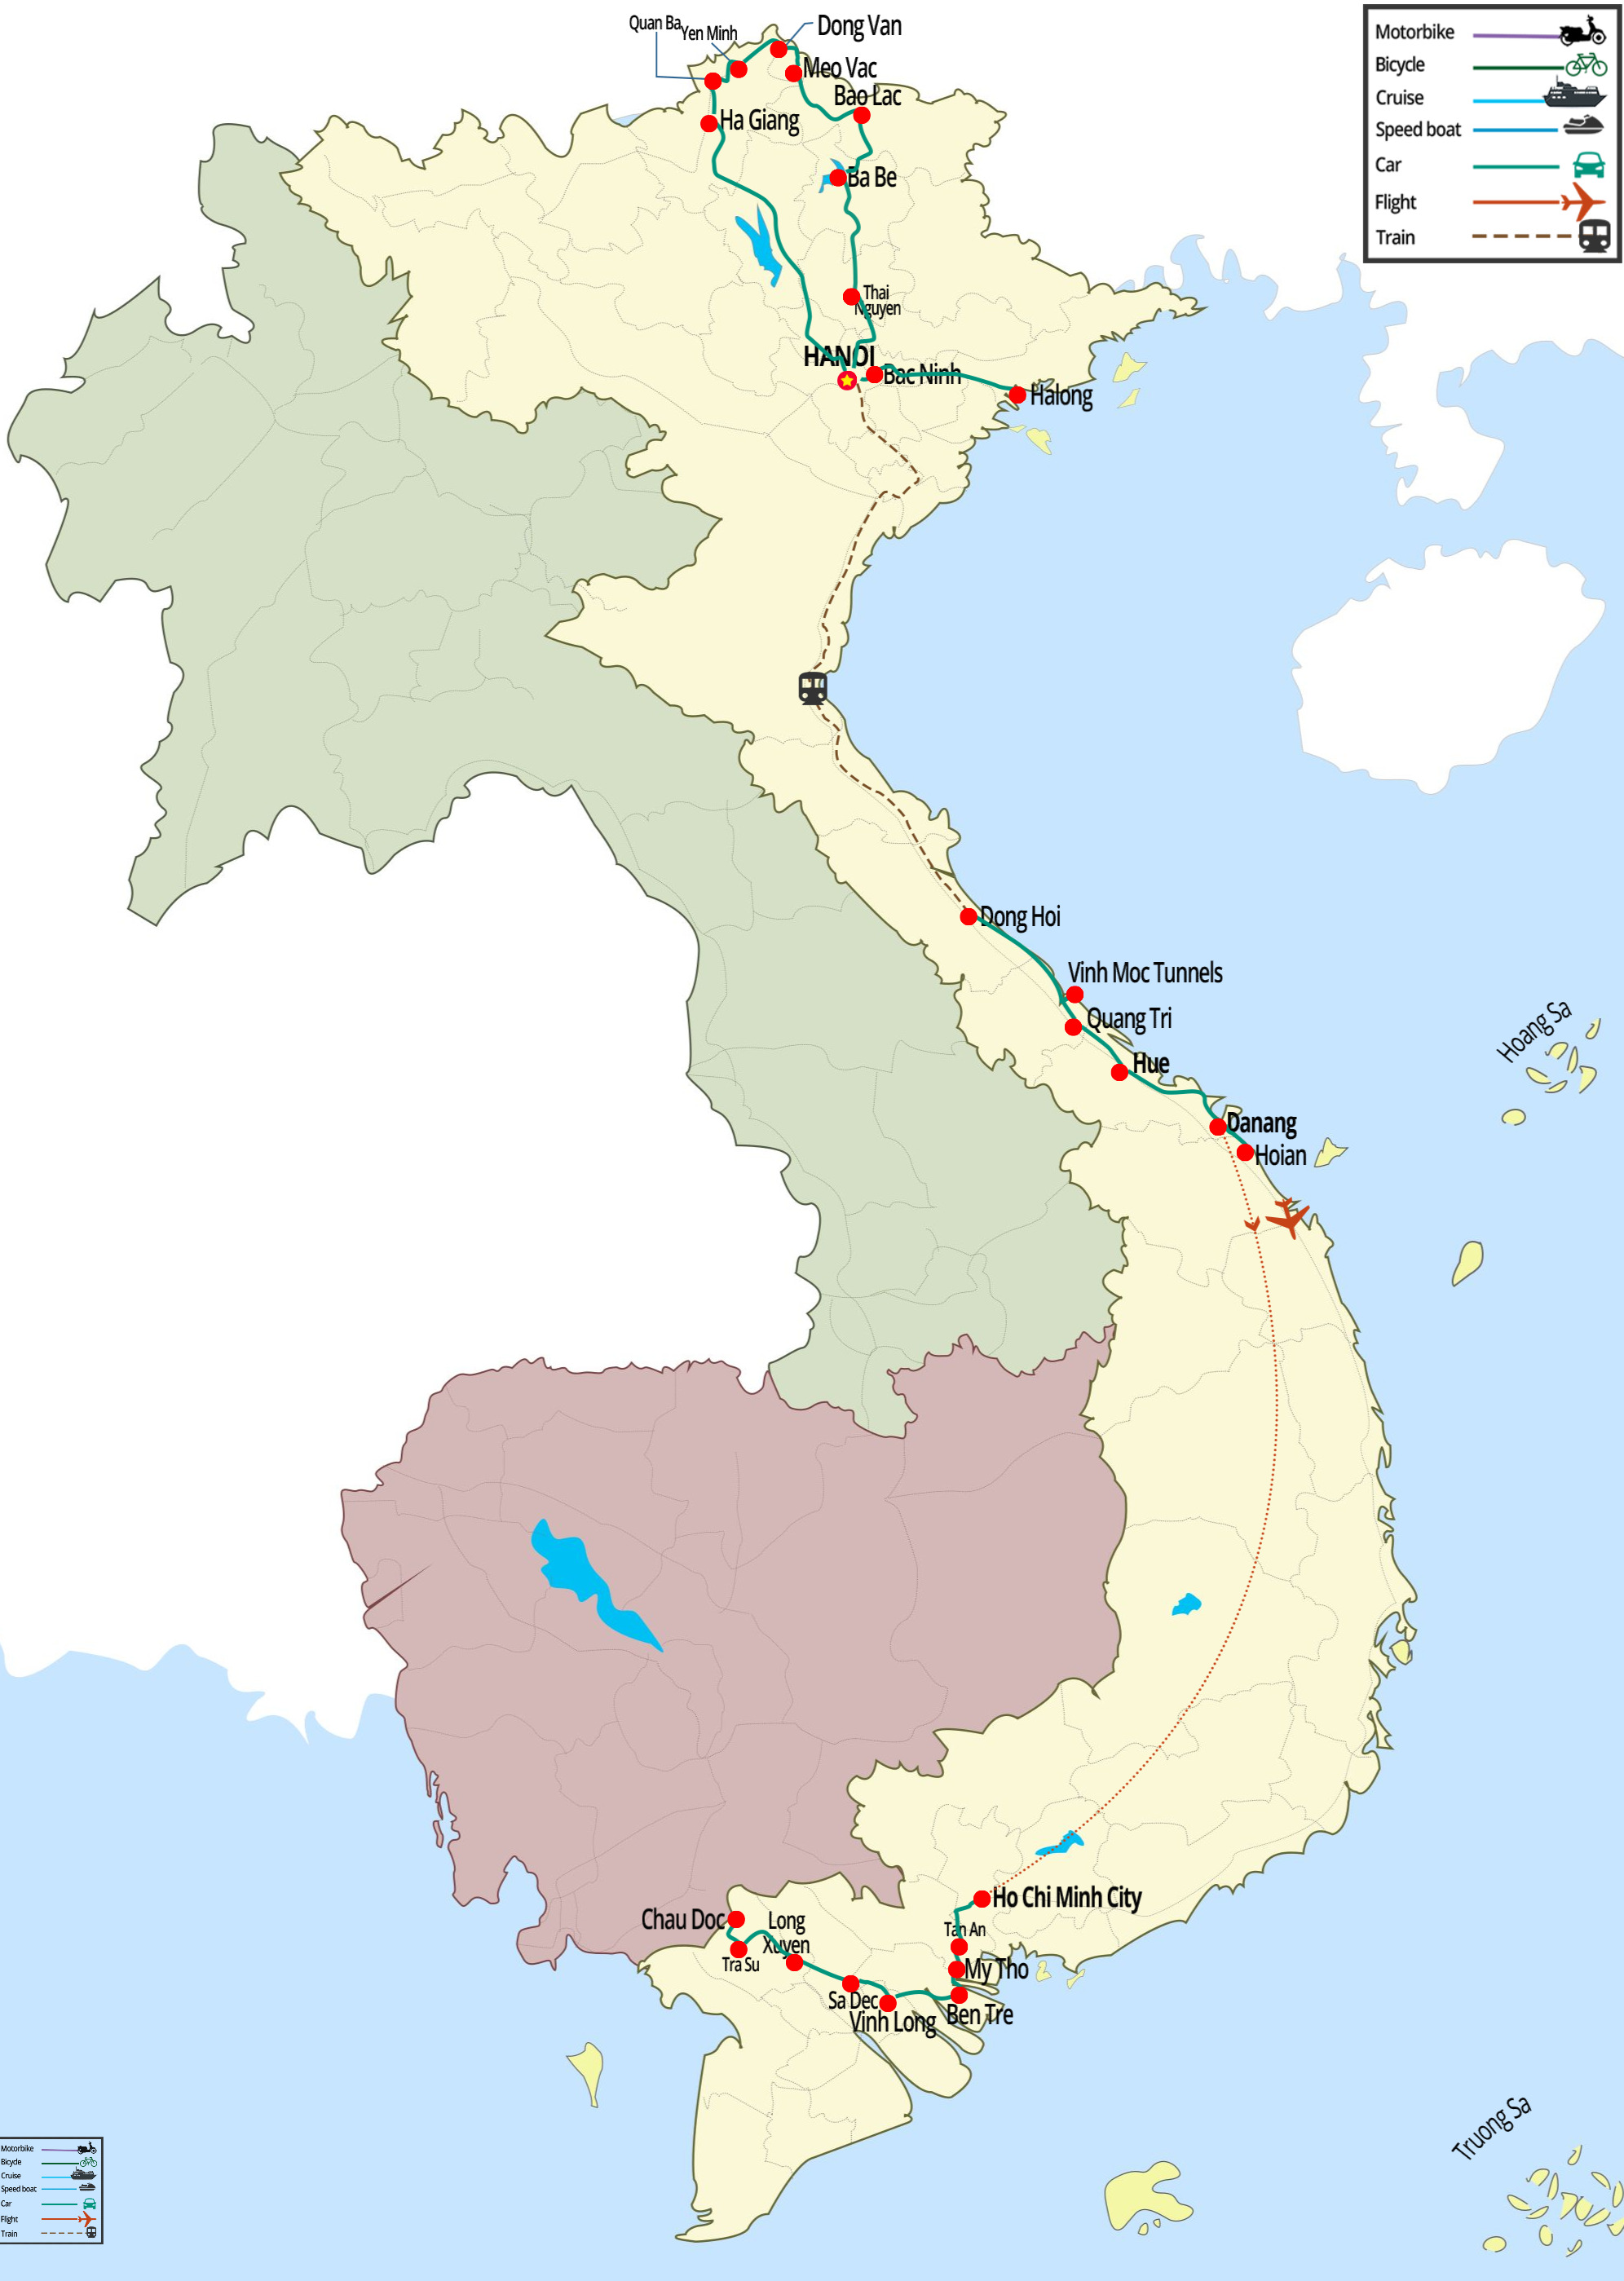 Vietnam tour 3 weeks, Vietnam tour 21 days, Vietnam tour from north to south